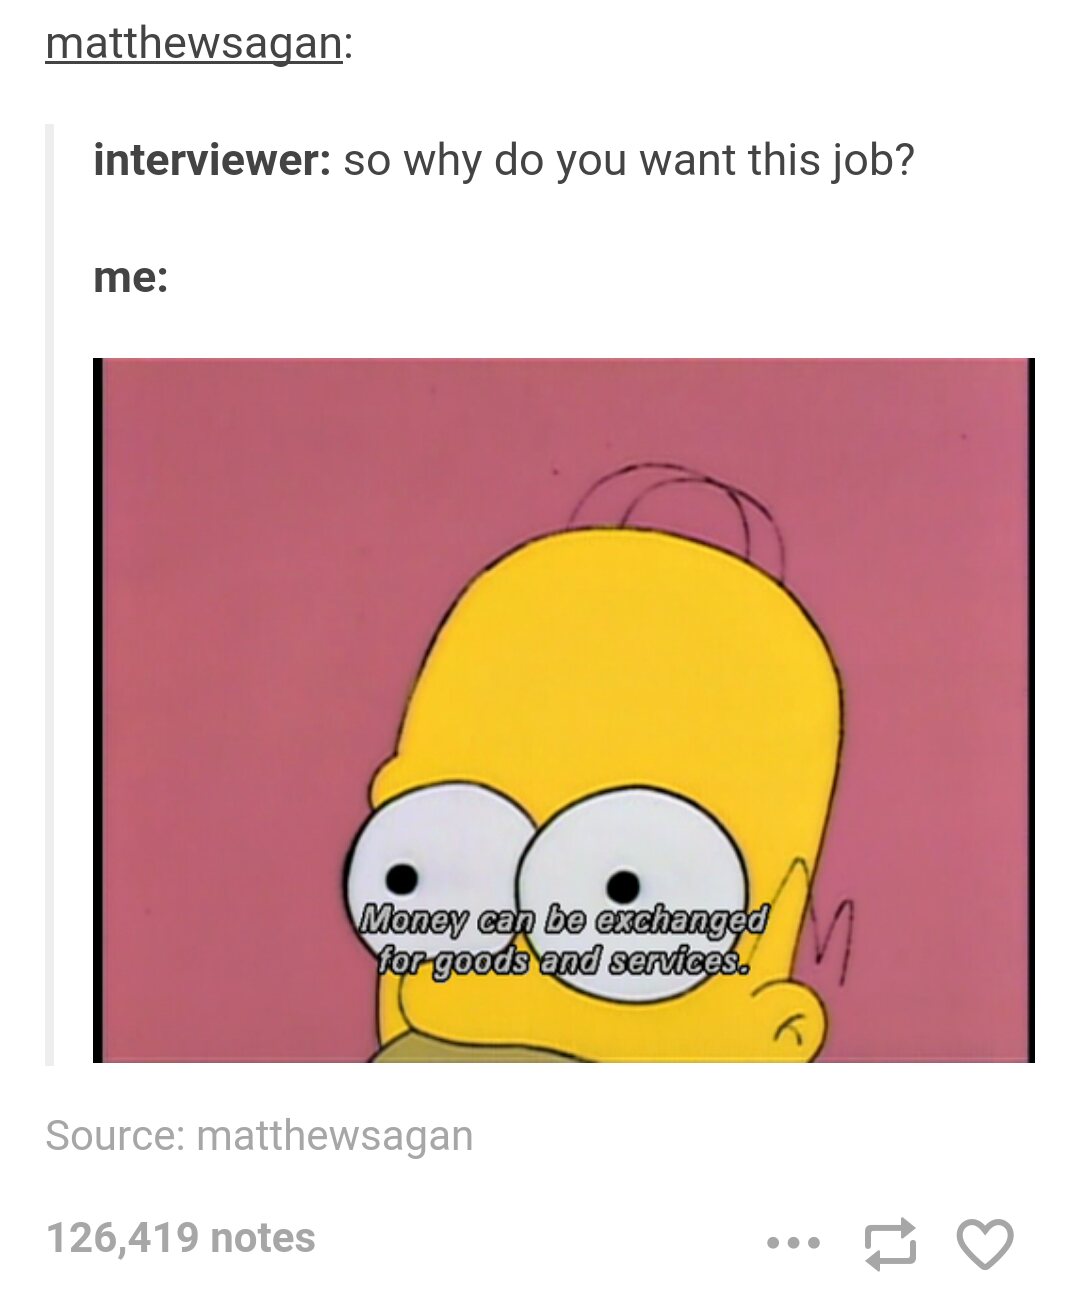 do you do this to me - matthewsagan interviewer so why do you want this job? me Money can be exchanged Yor goods and services. Source matthewsagan 126,419 notes